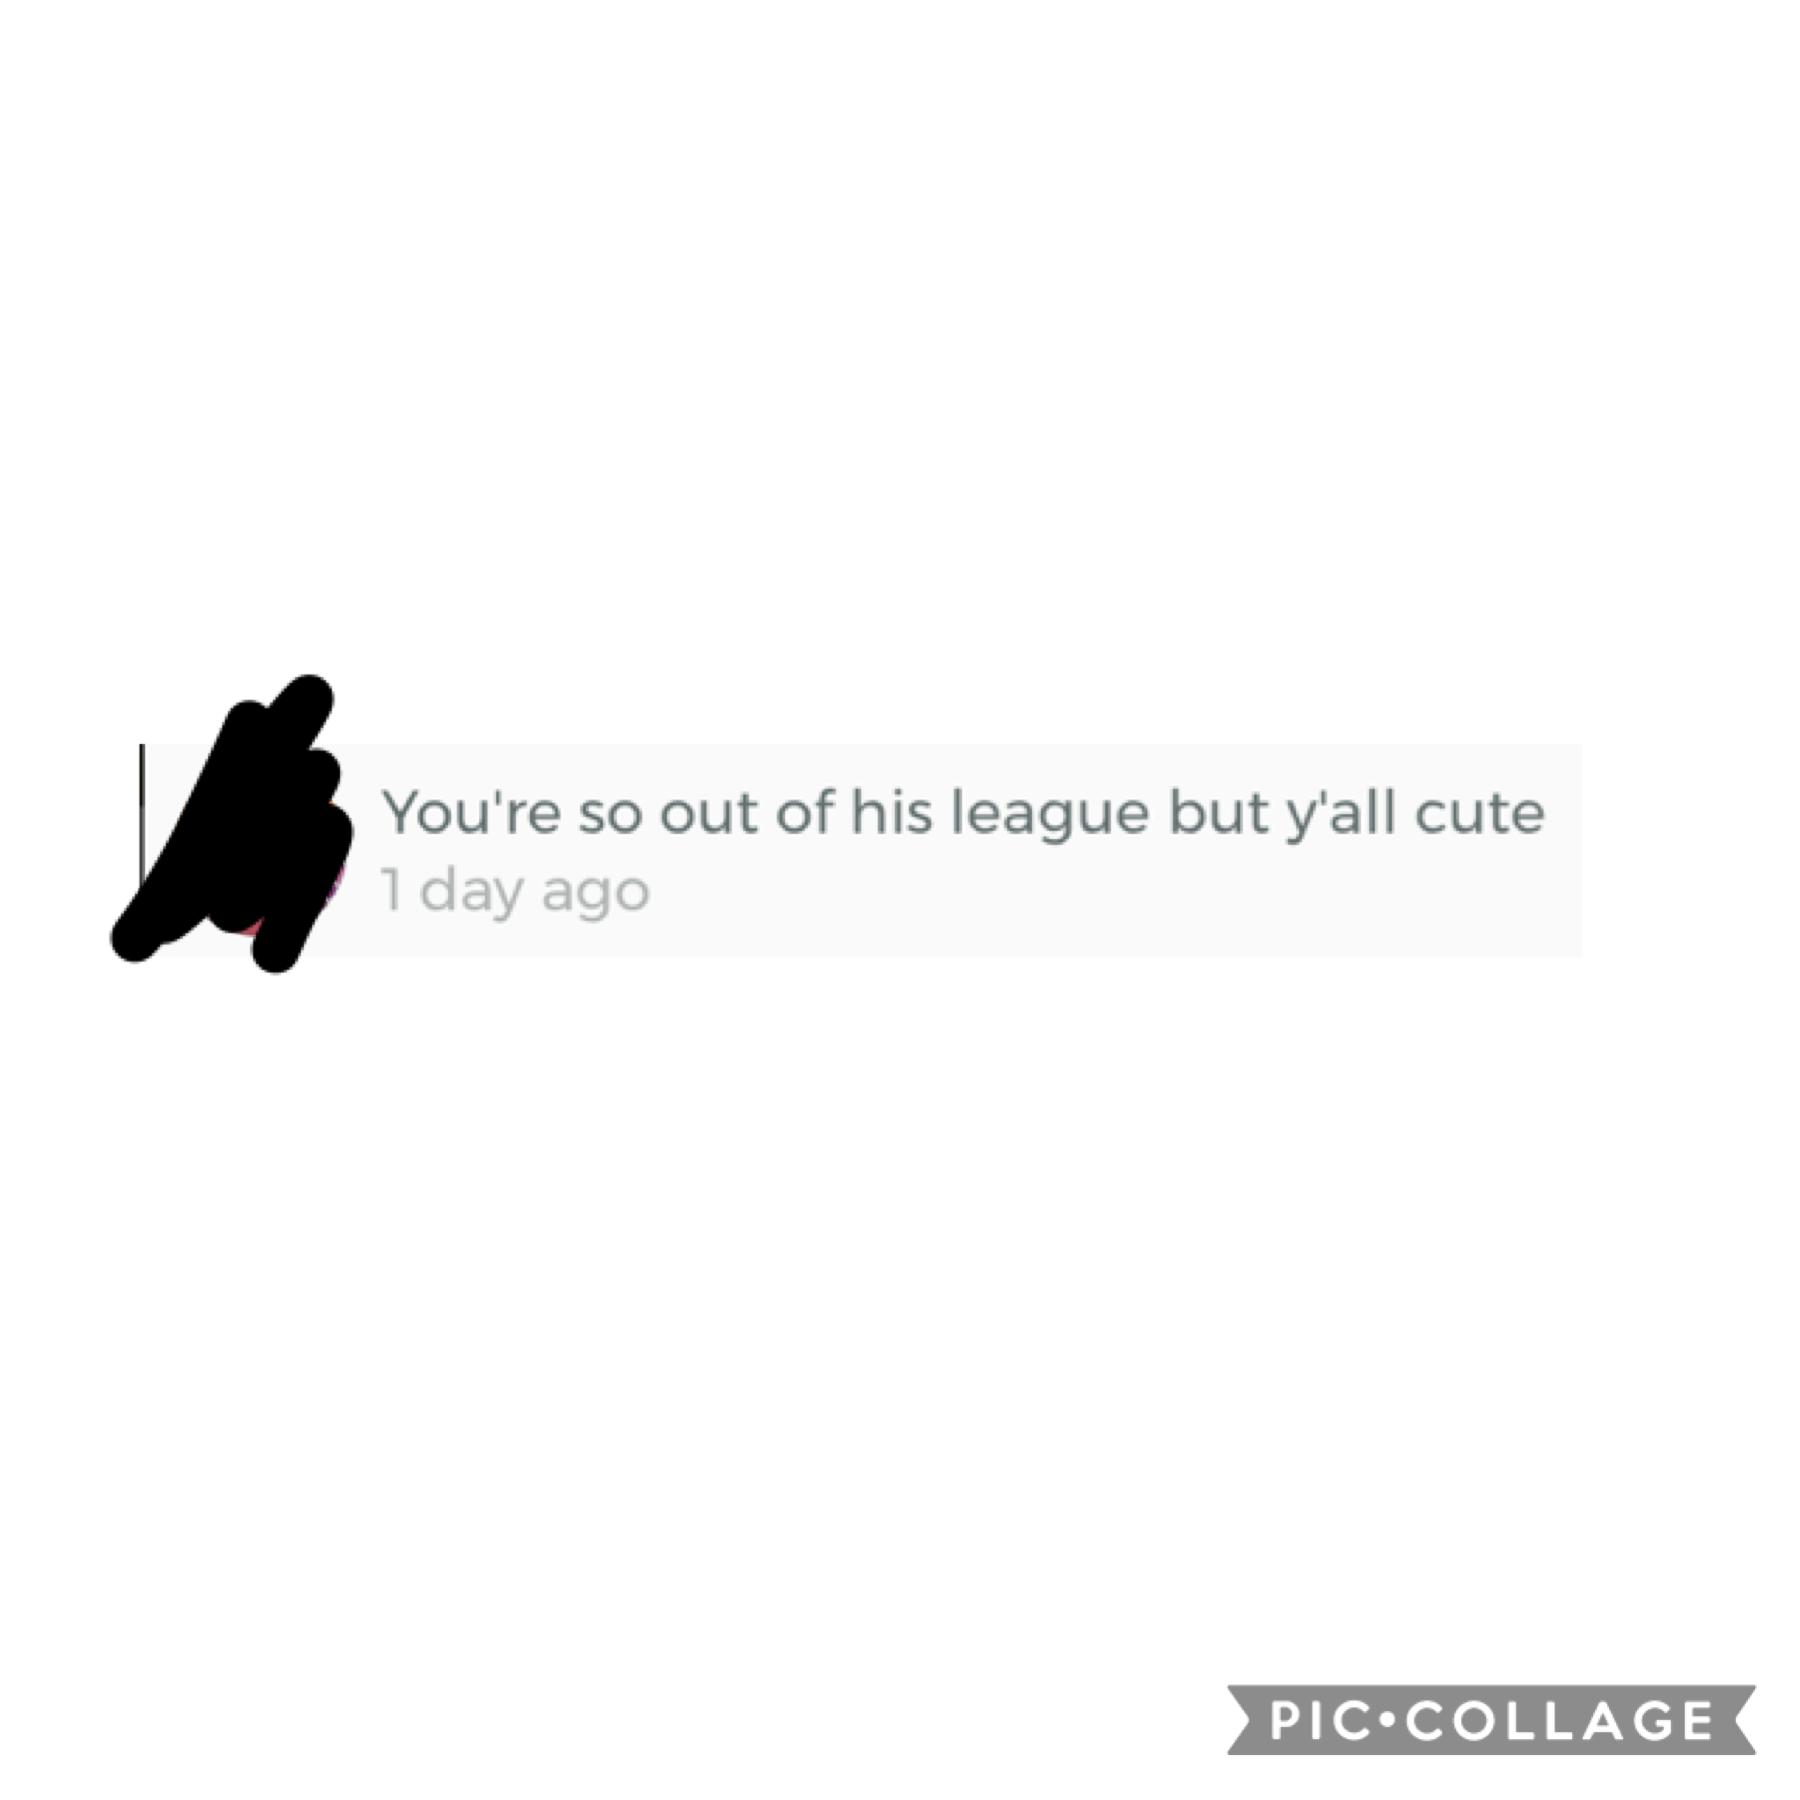 ummmm hi idk if this was meant to be an insult towards my bf but if so i don’t like these kinds of comments! not that it matters bc he’s beautiful in my eyes. but if it’s just a compliment towards me then thanks lol but there are better ways of wording th